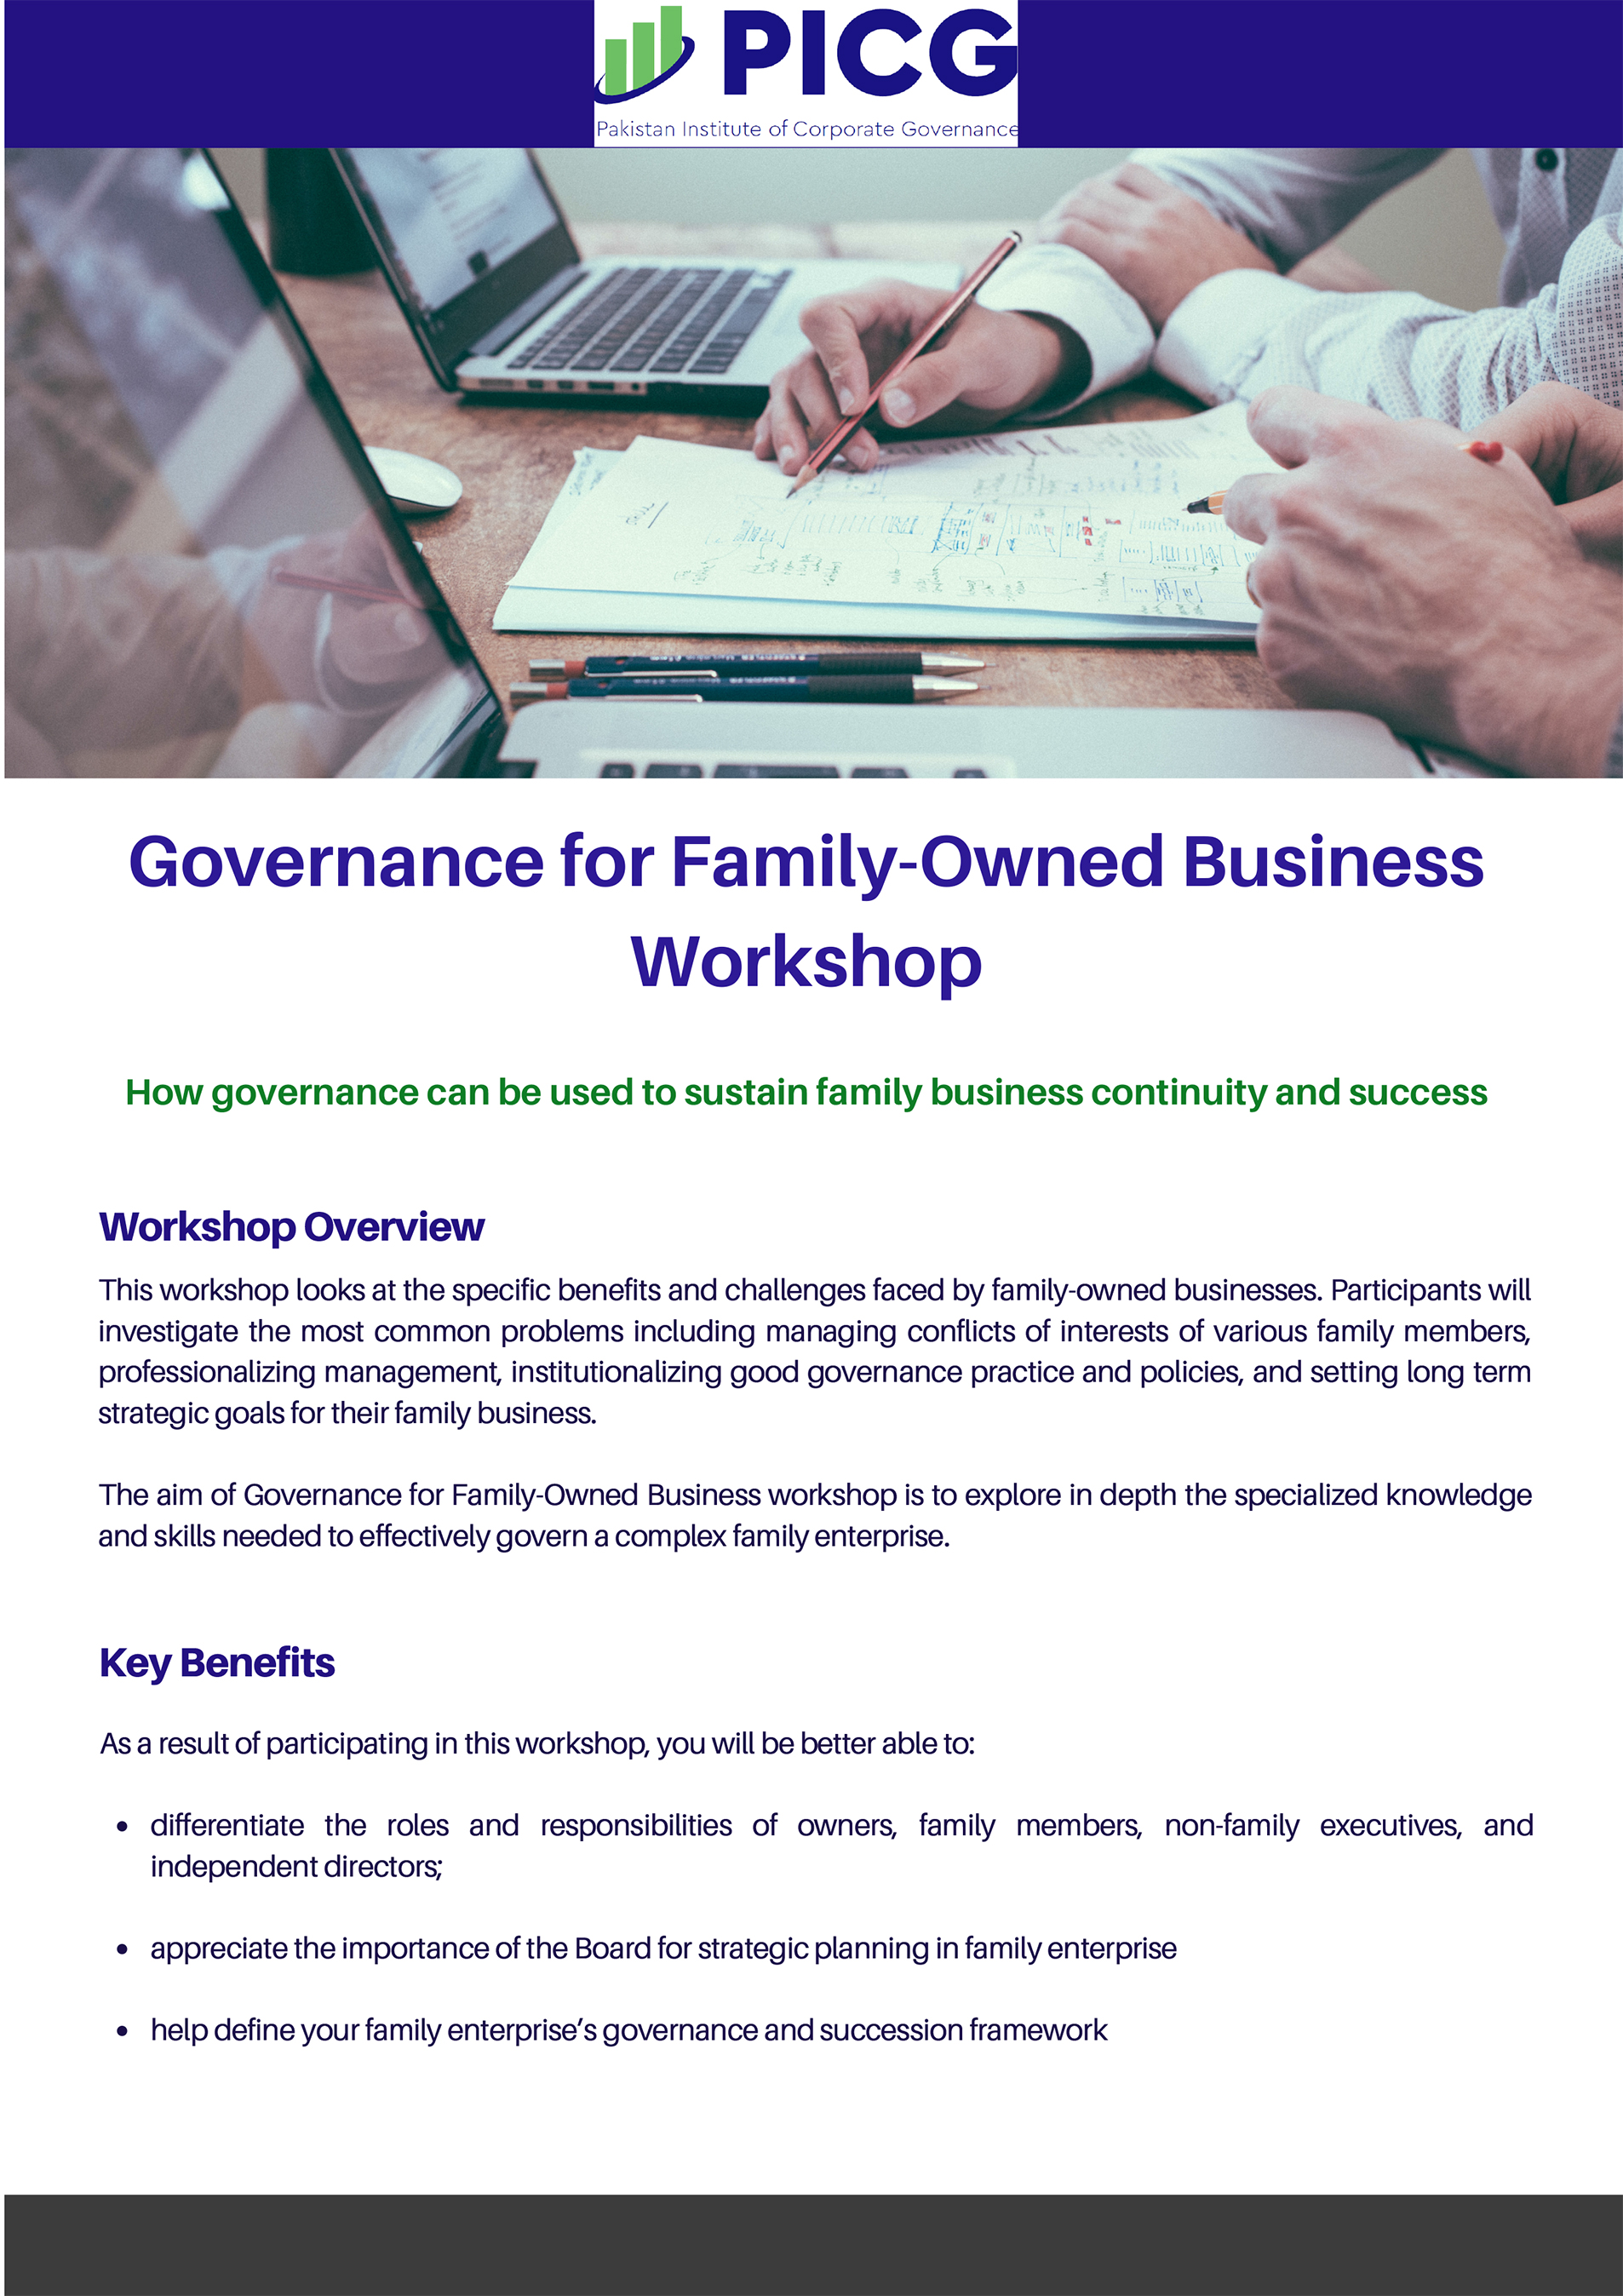 Governance for Family-Owned Business Workshop